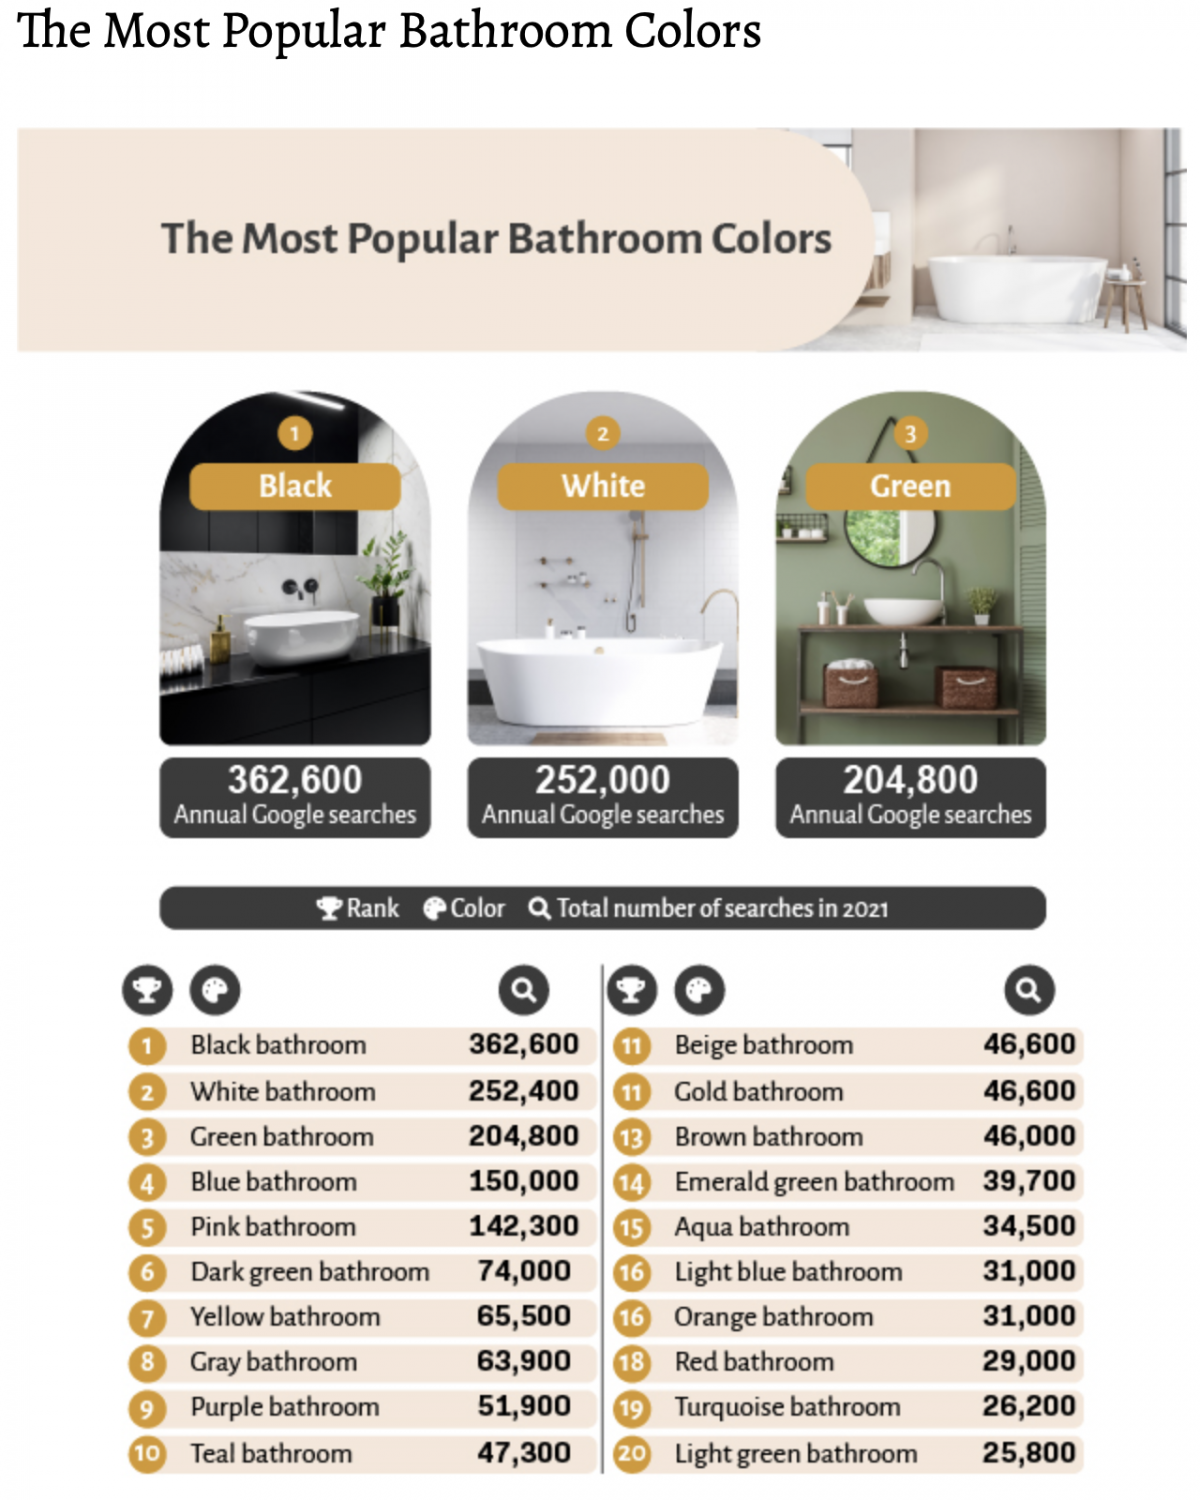 A visual list of the most popular bathroom colors, the top three being black, white, and green.